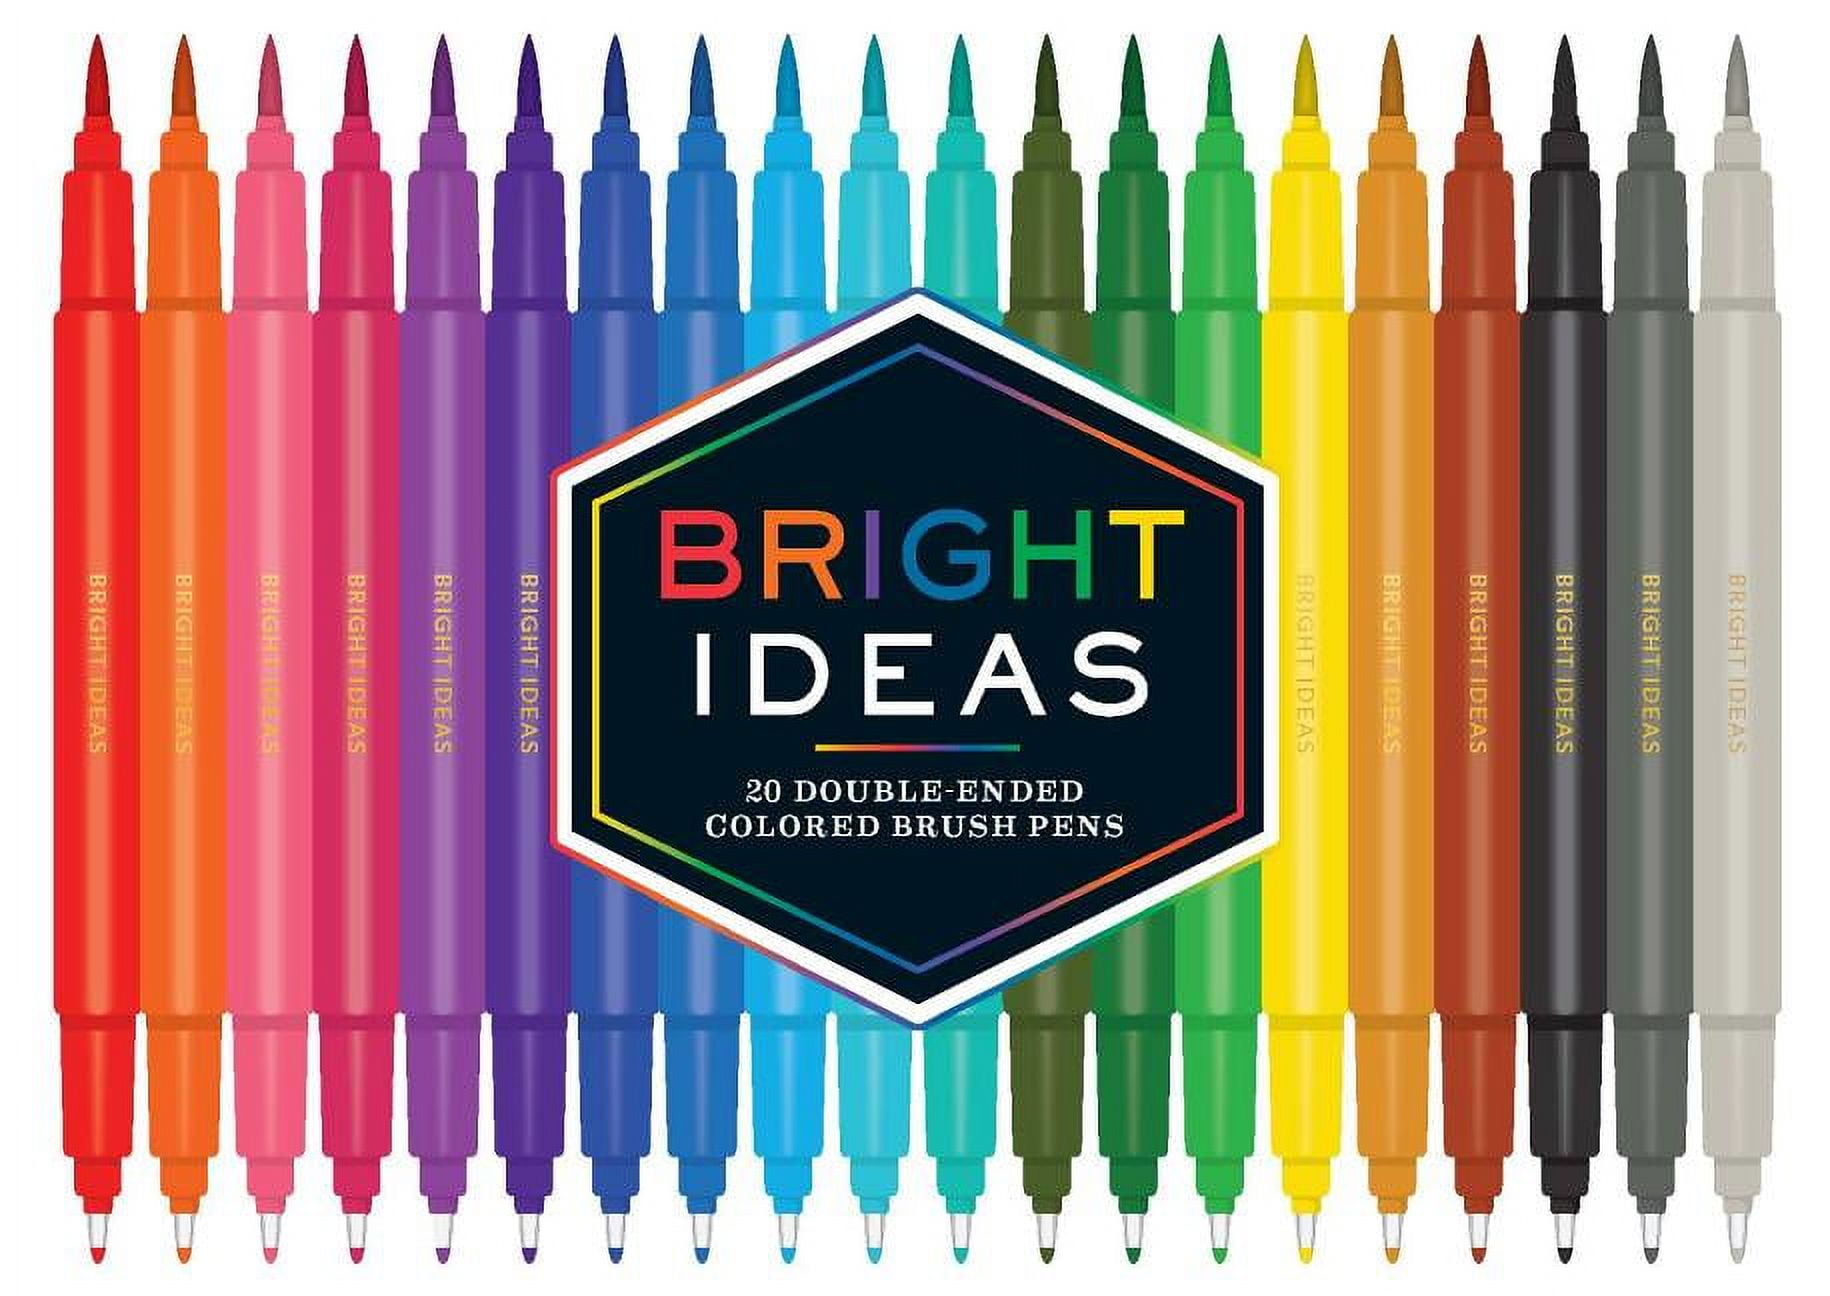 Bright Ideas: Bright Ideas: 20 Double-Ended Colored Brush Pens